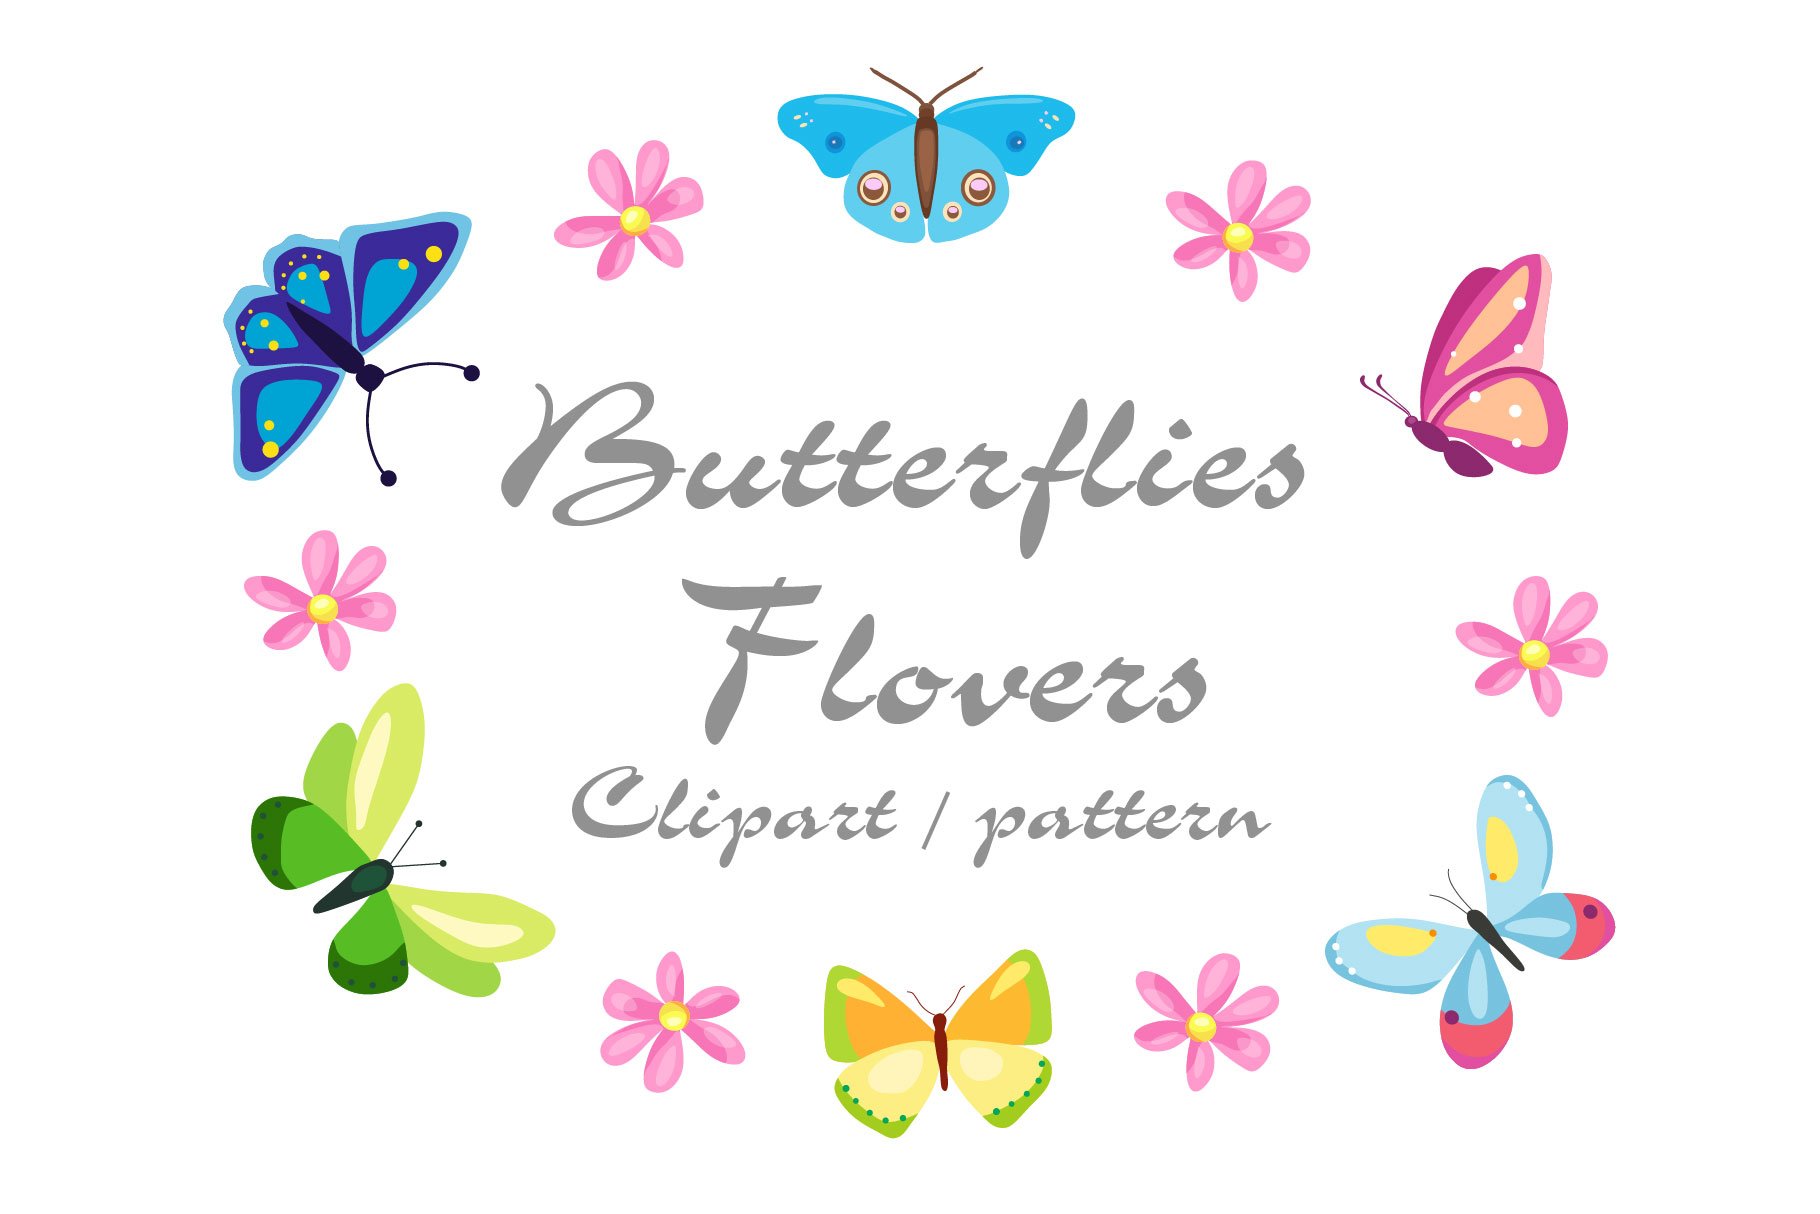 Butterflies cover image.